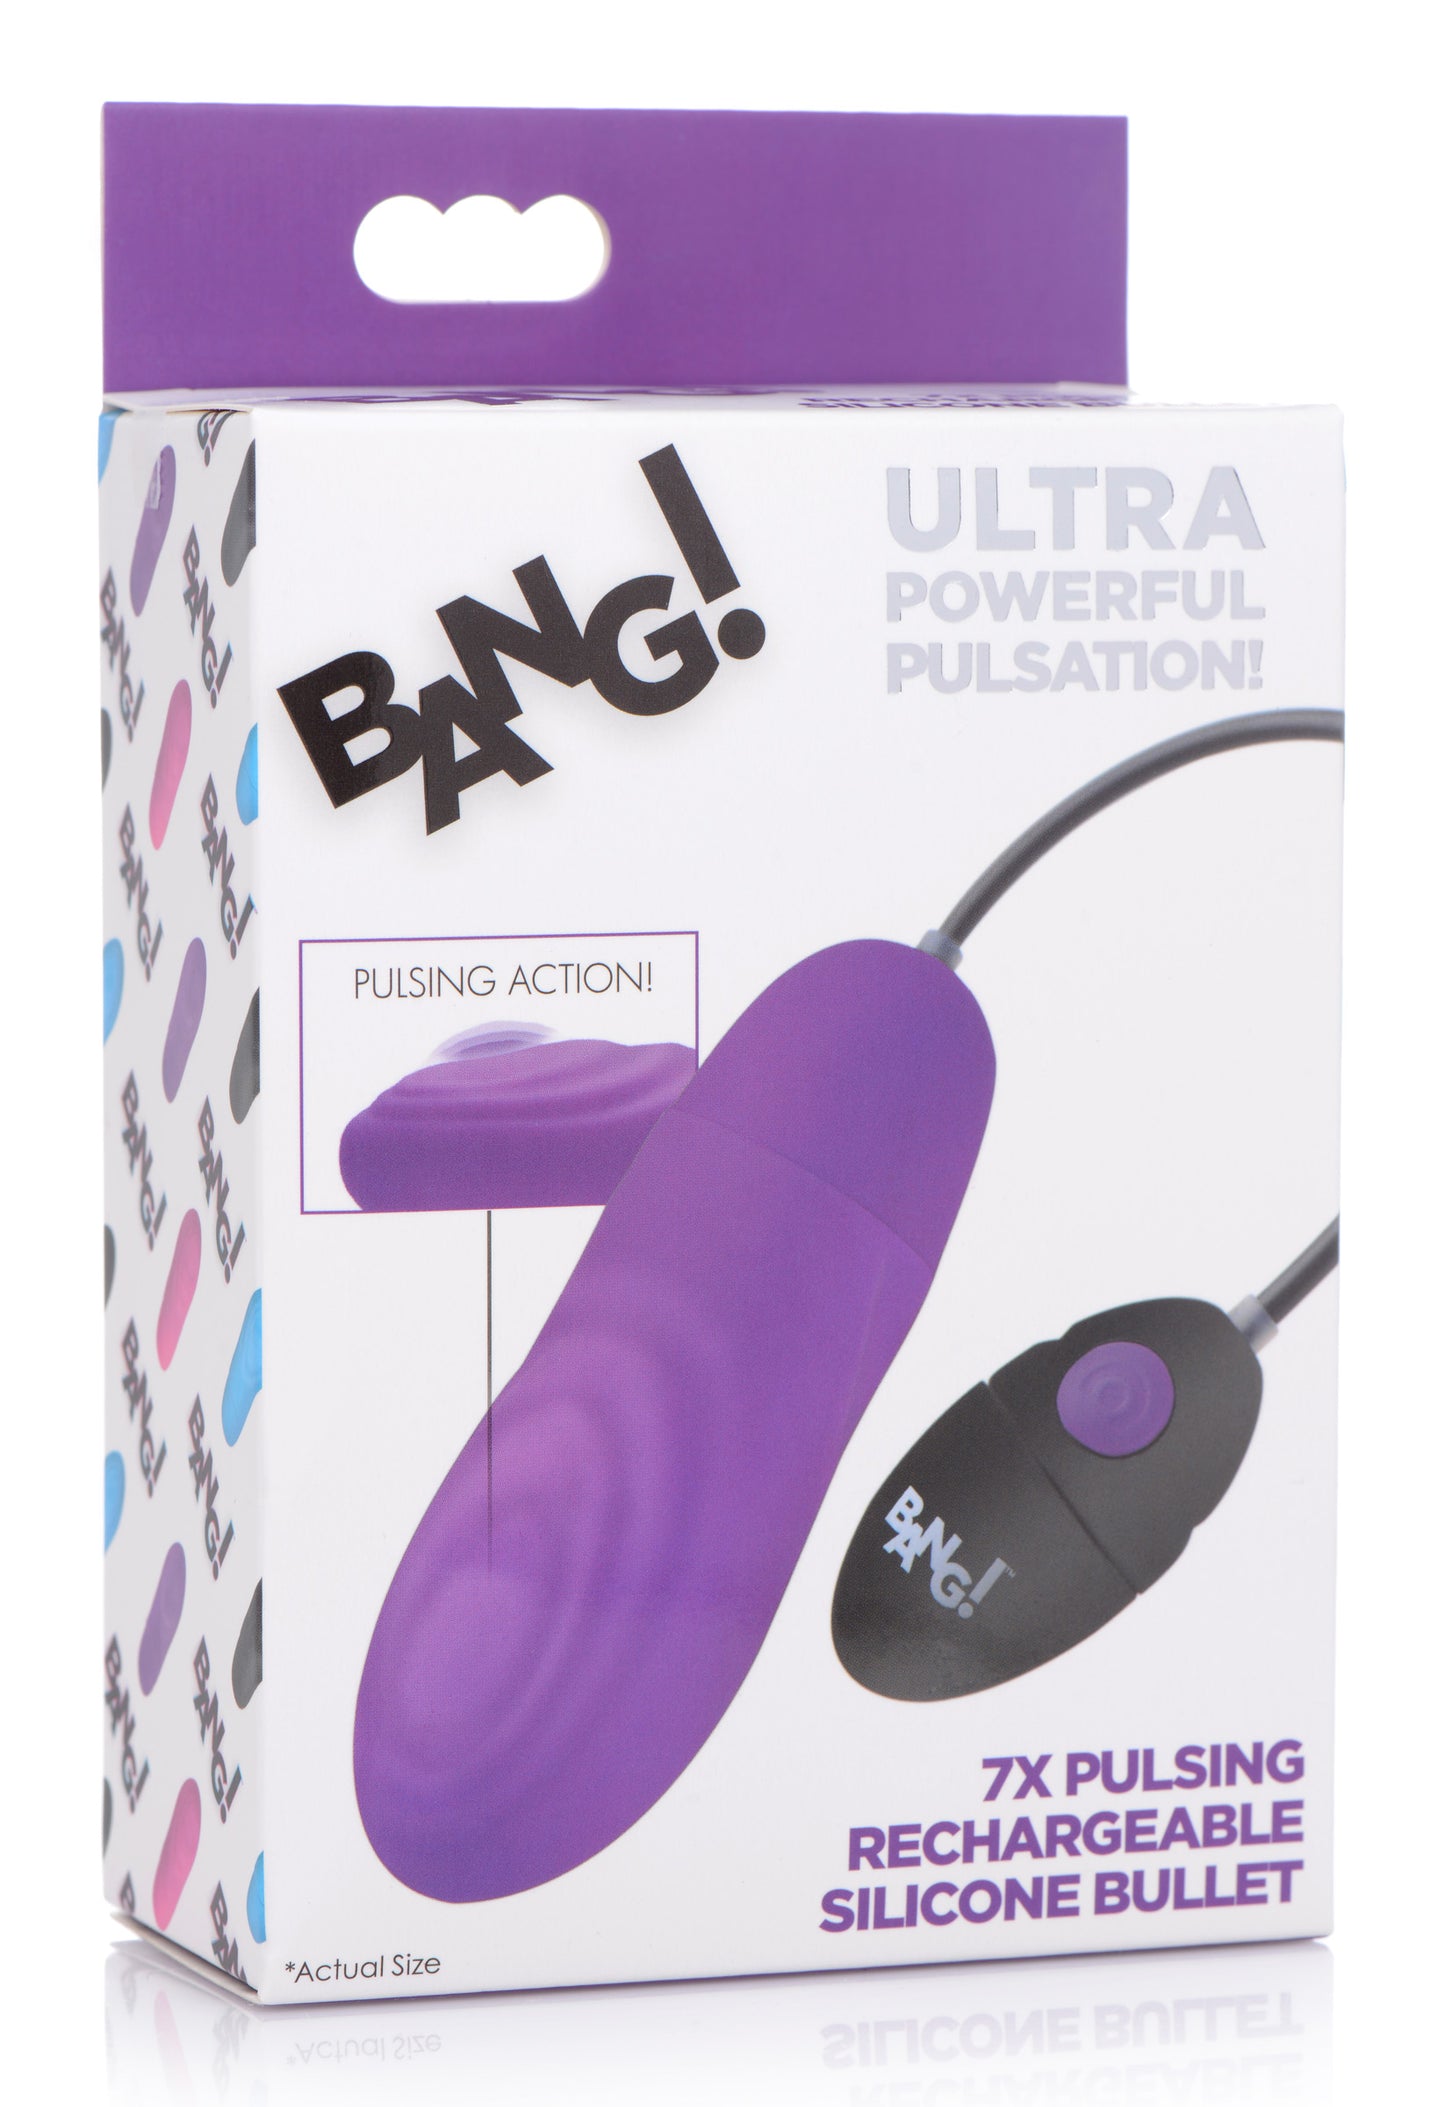 7x Pulsing Rechargeable Silicone Vibrator - Purple